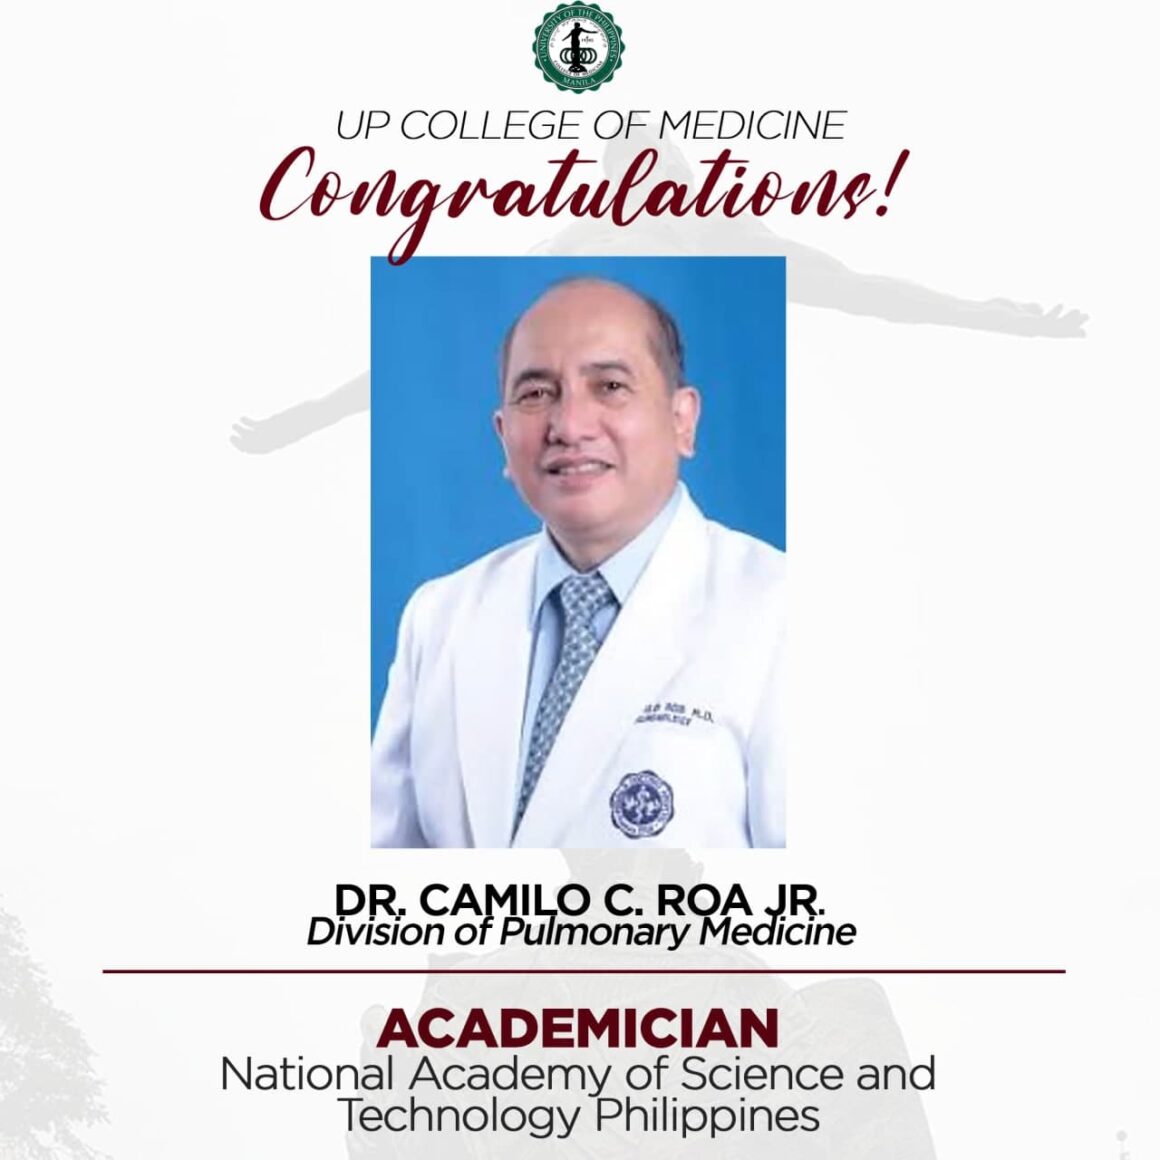 Congratulations Dr. Camilo Roa, Jr. : Academician, National Academy of Science and Technology Philippines